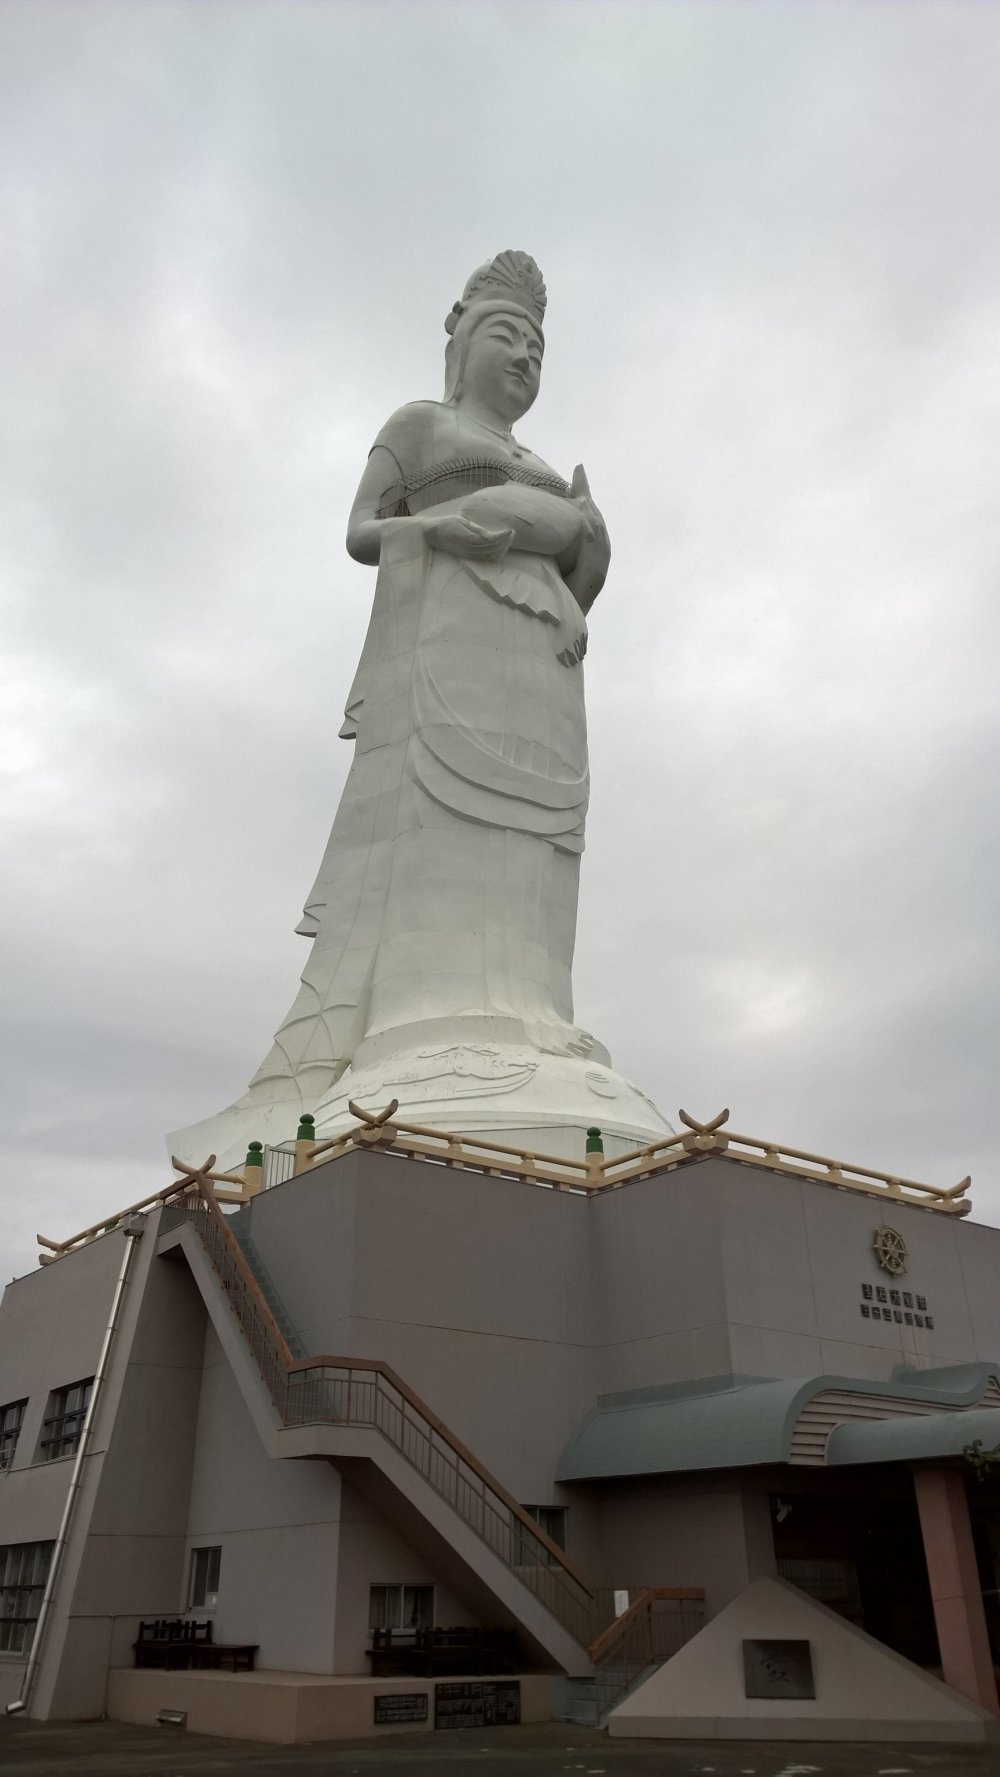 The big Kannon, notice the sea connection